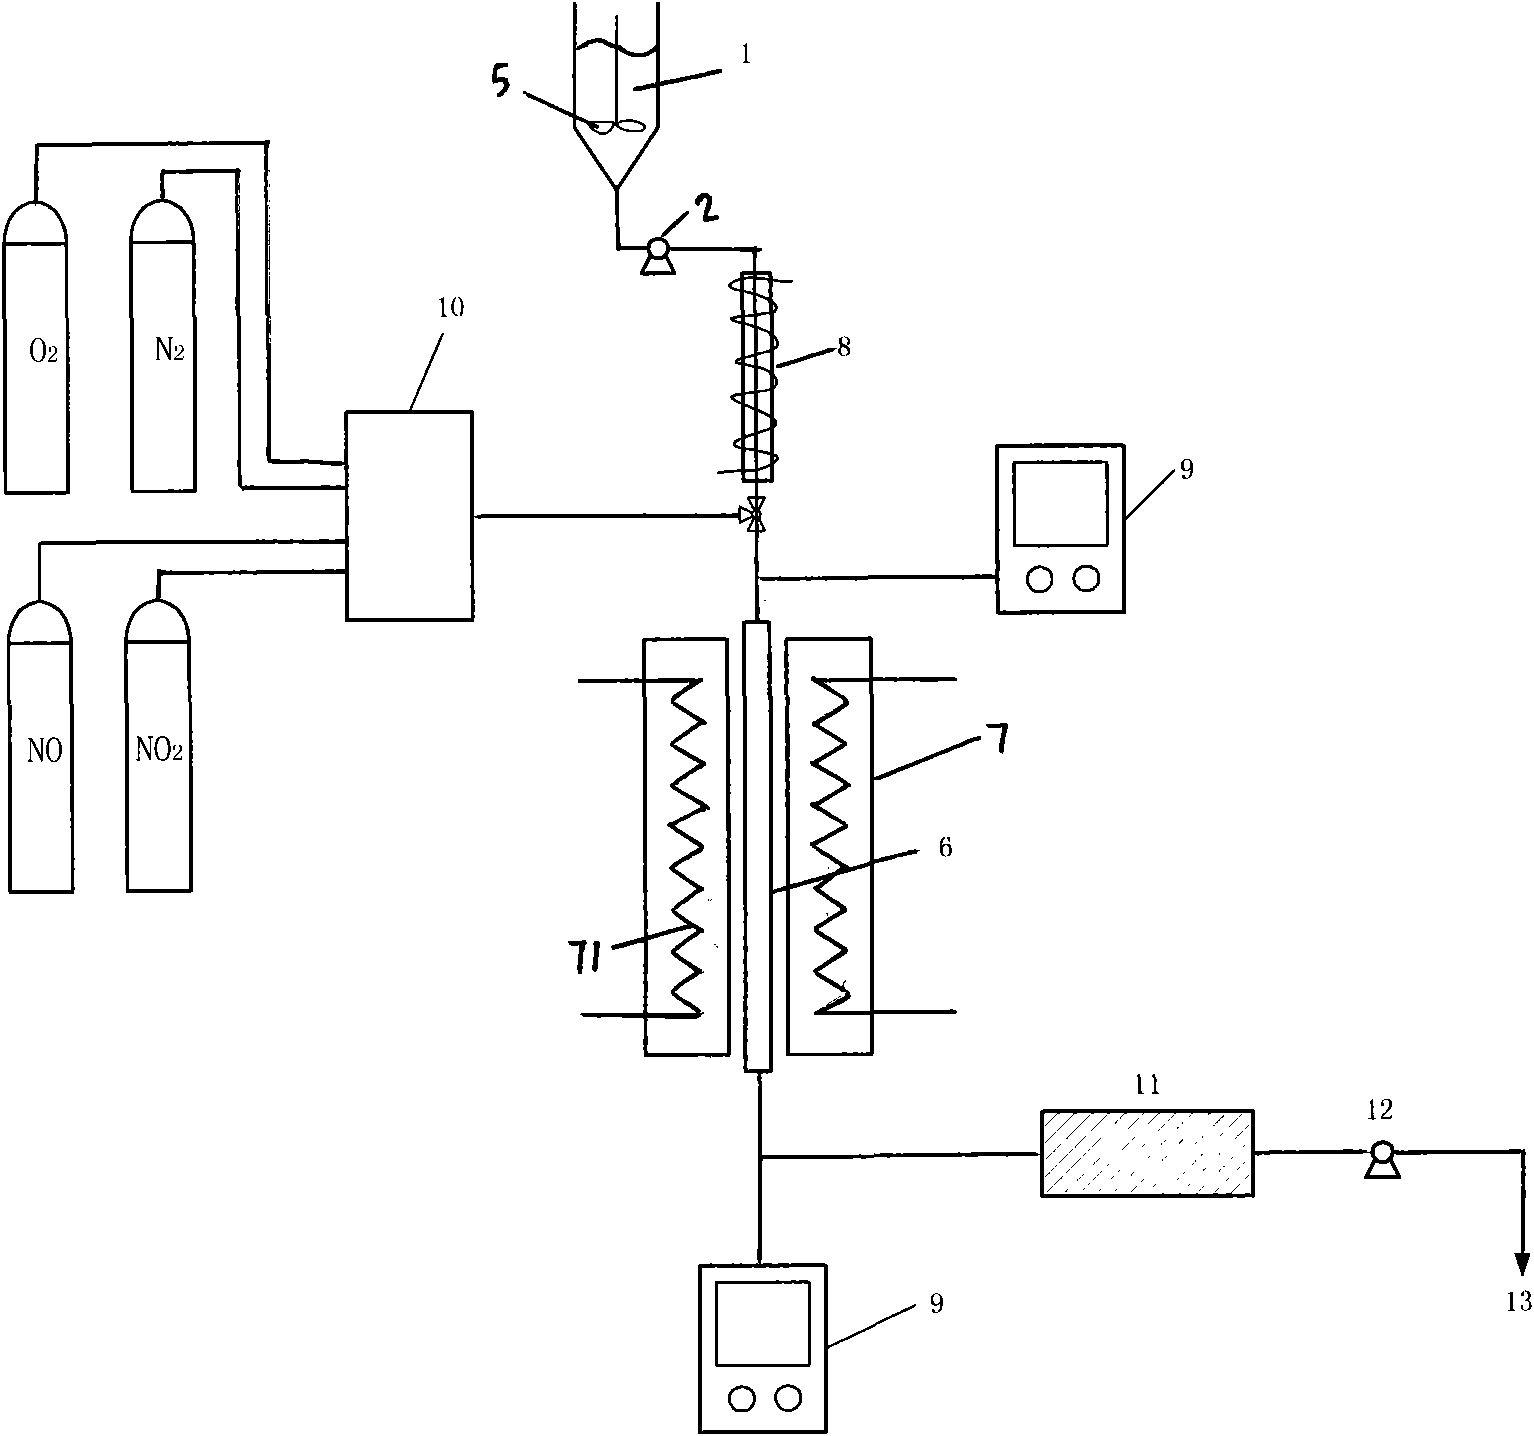 Method for removing NOX in flue gas